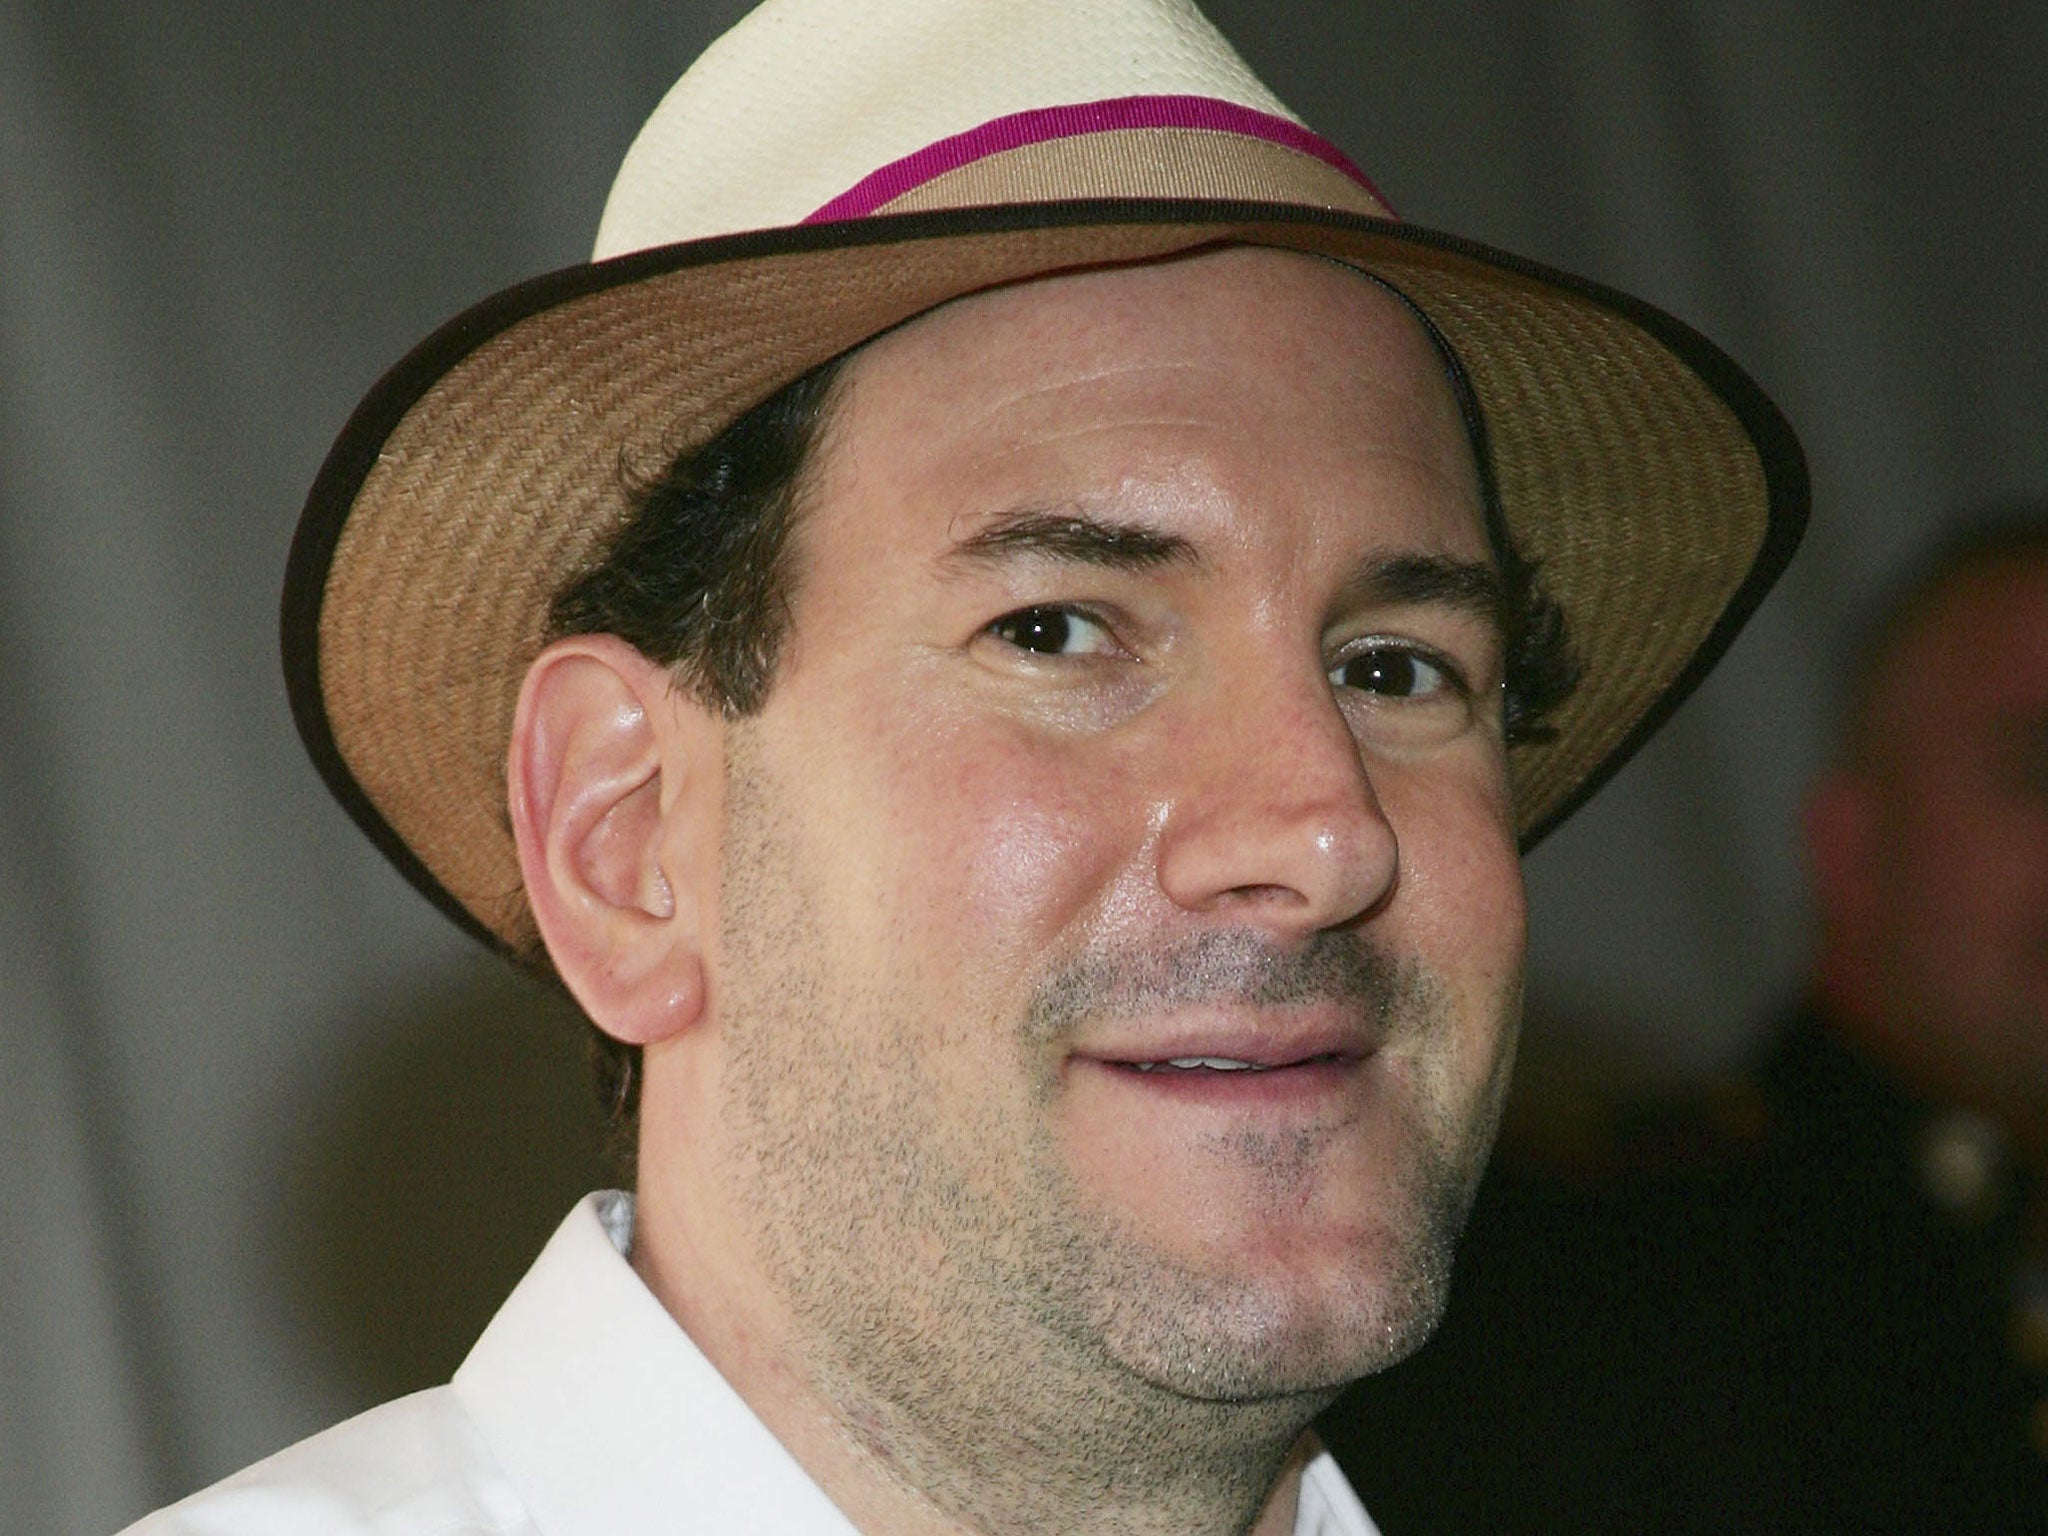 Drudge Report founder and rightwing commentator Matt Drudge mystifies